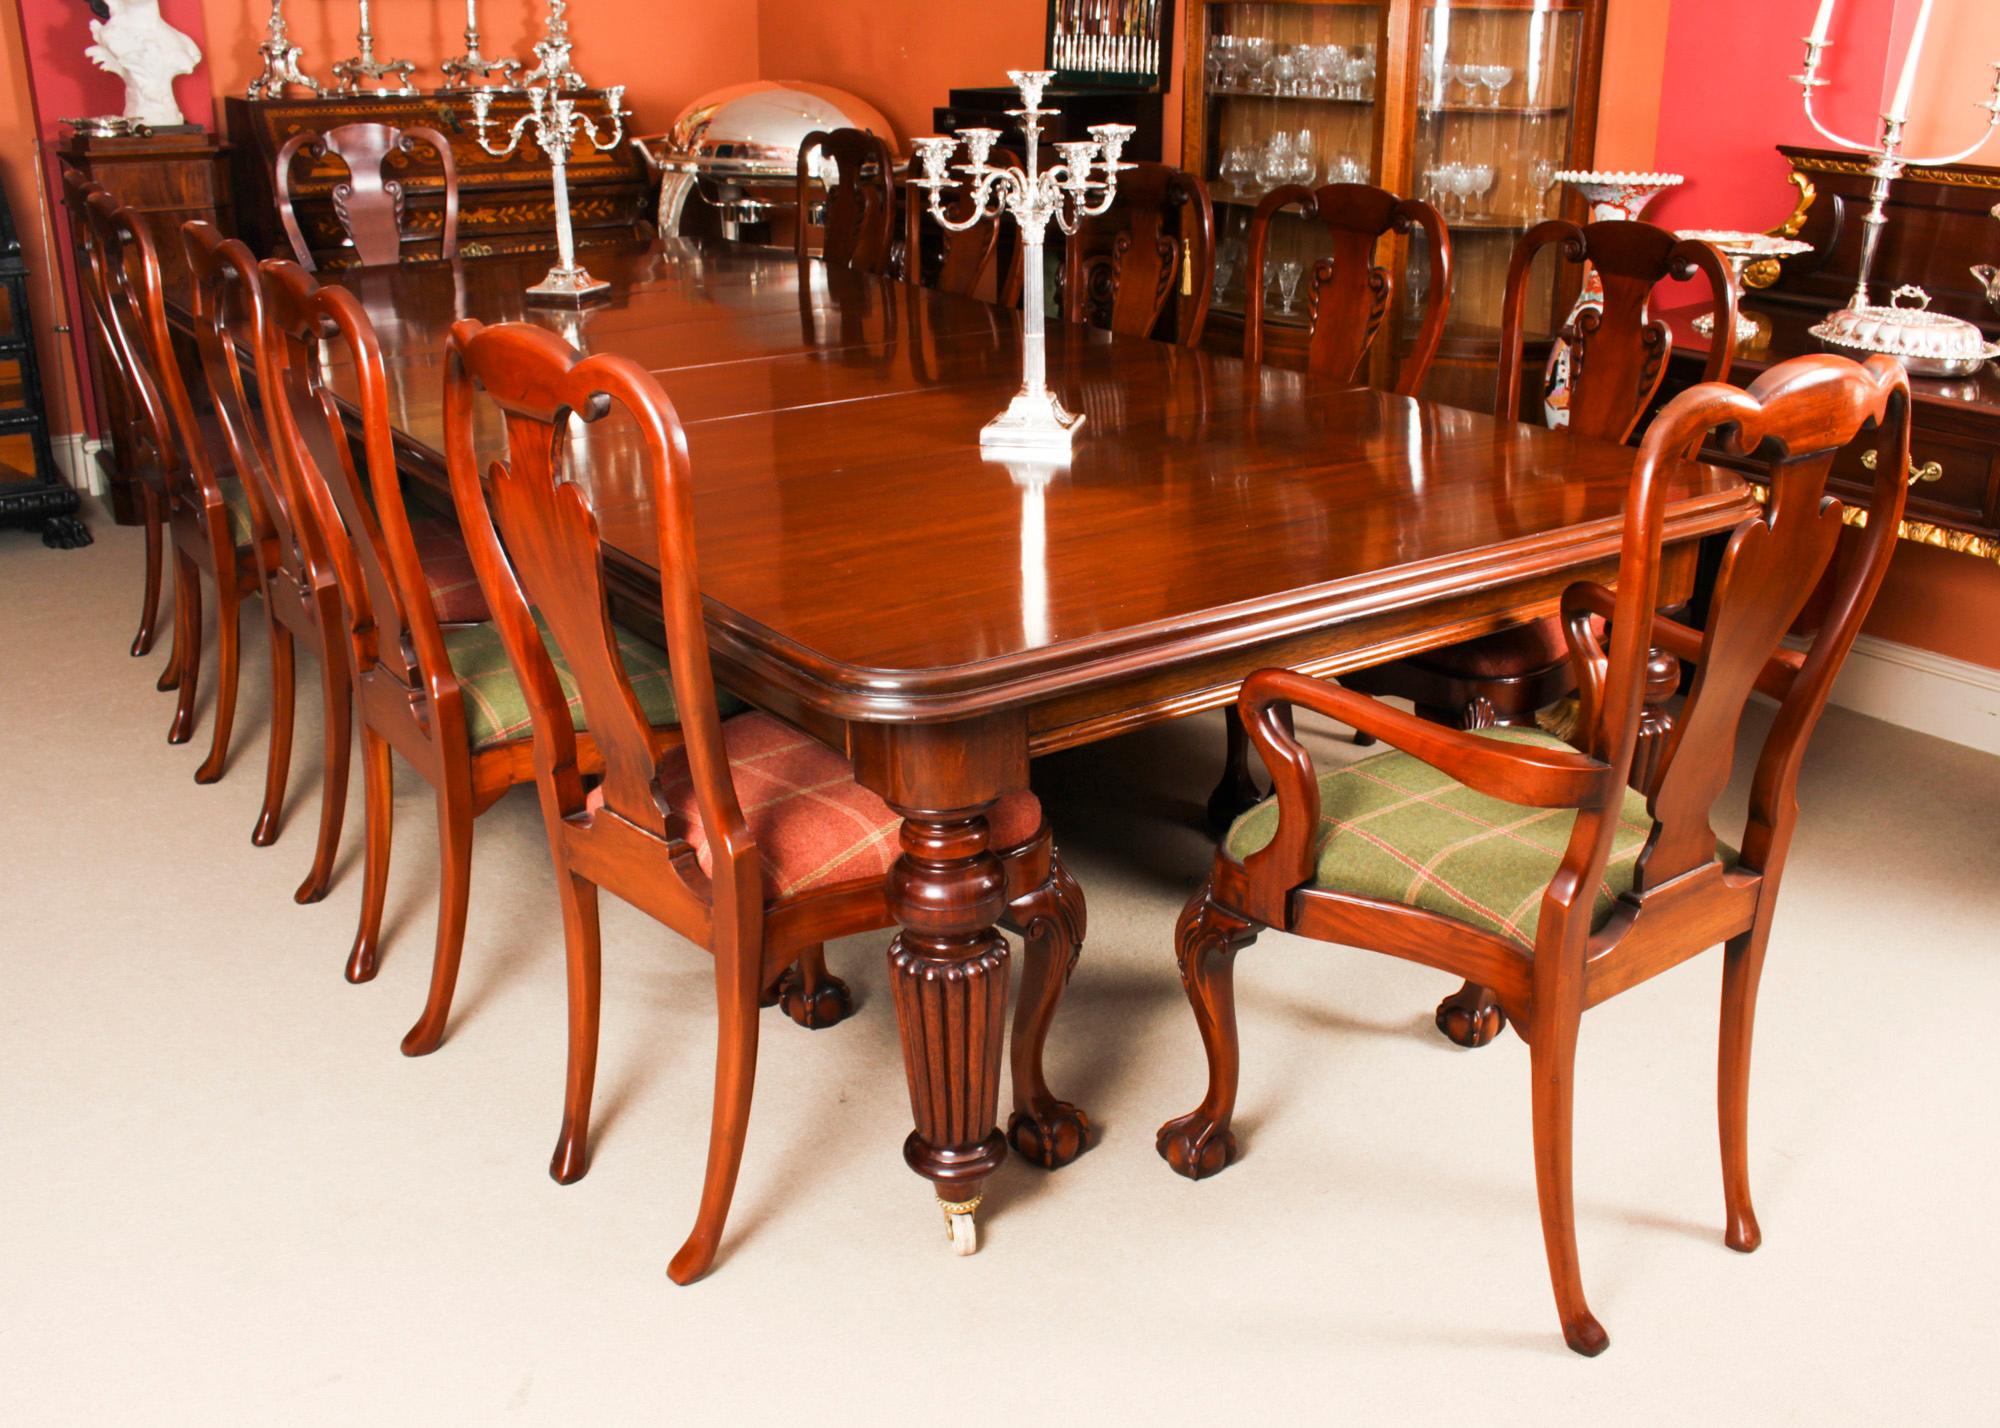 This is a rare opportunity to own an antique early Victorian, flame mahogany dining or conference table, circa 1850 in date and a set of twelve vintage Queen Anne Revival dining chairs, dating from the mid 20th Century.

The superb dining table has